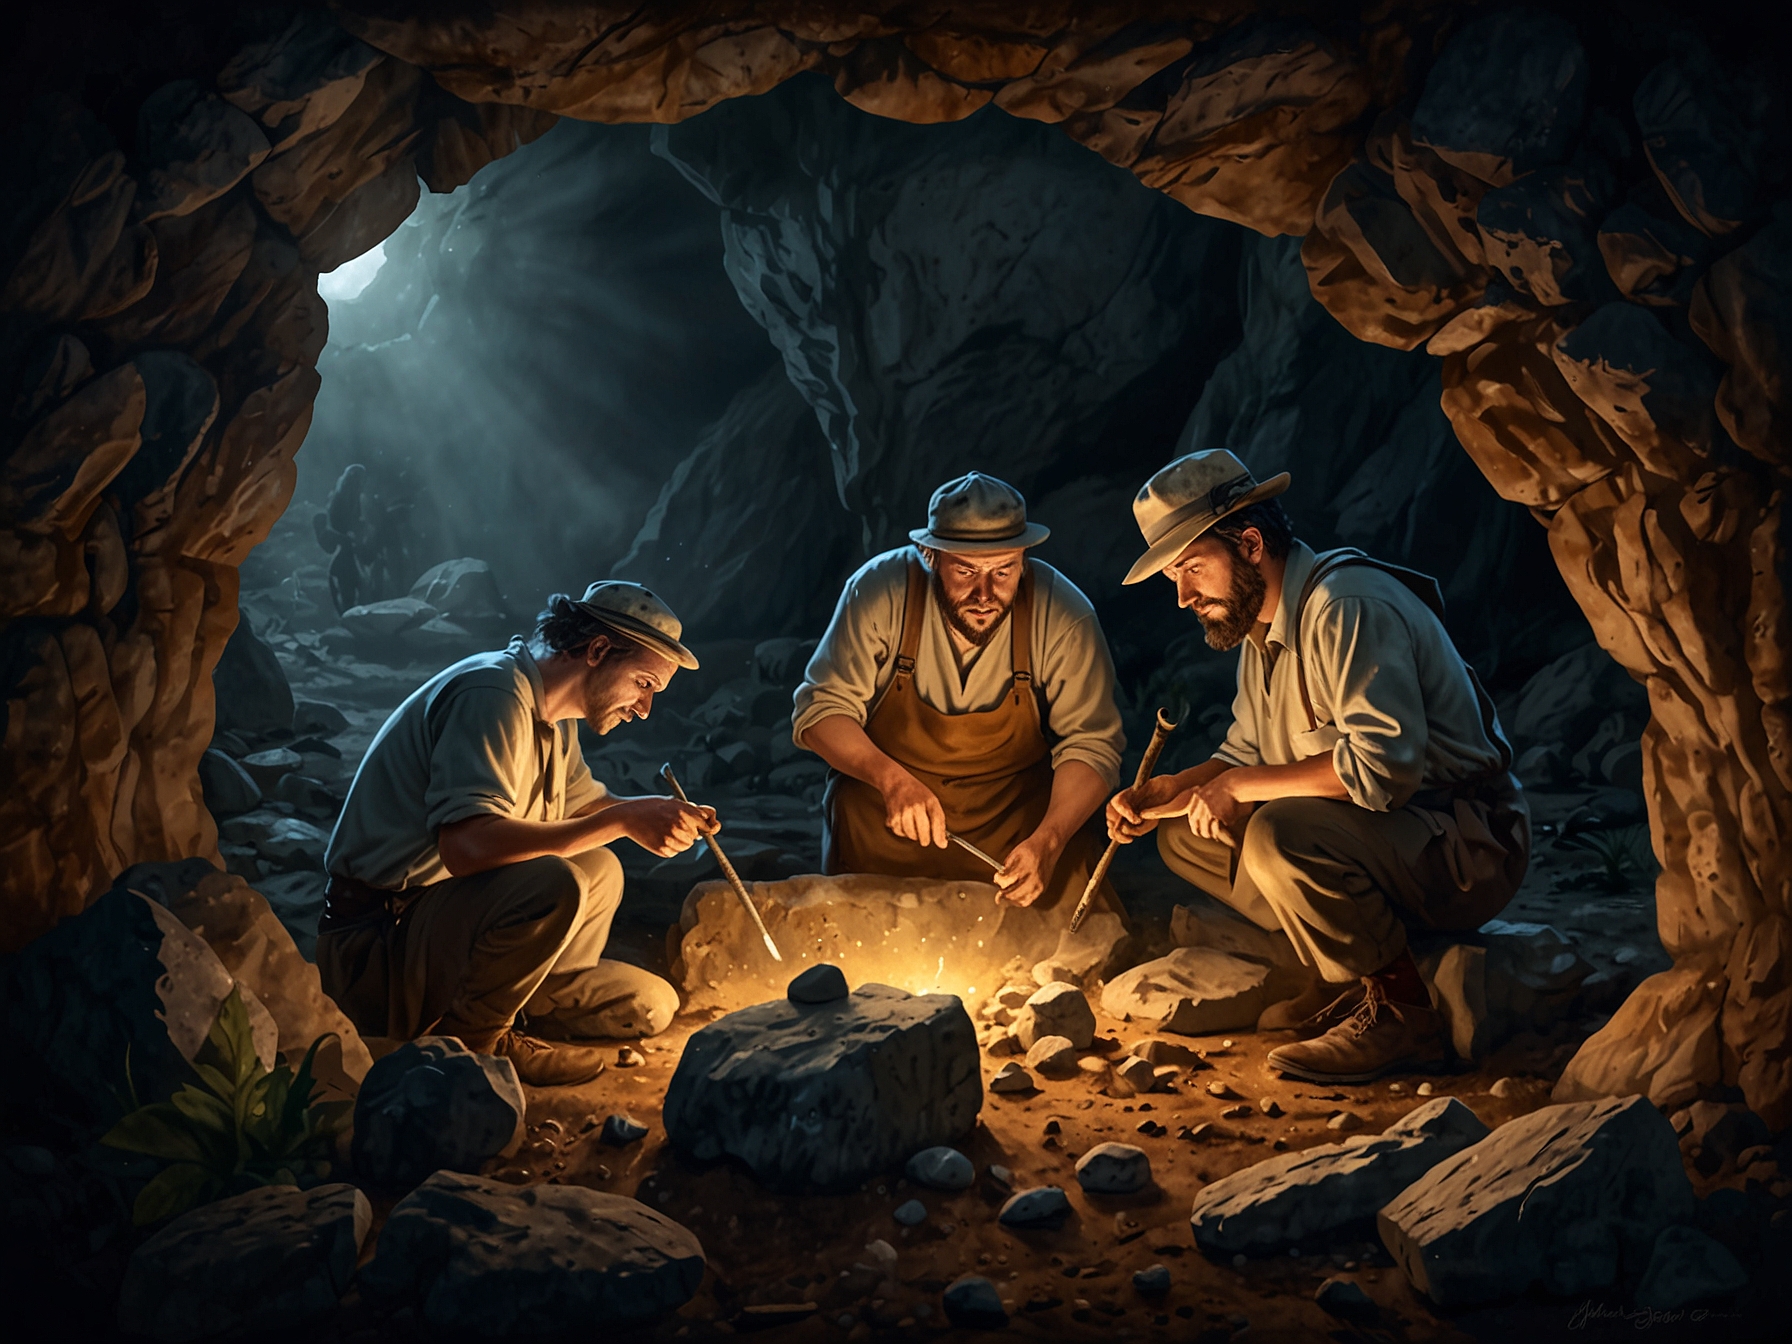 Archaeologists working in the Chaves cave uncovering well-preserved artefacts that highlight the diversity of Neolithic dietary practices in the Pyrenean region.